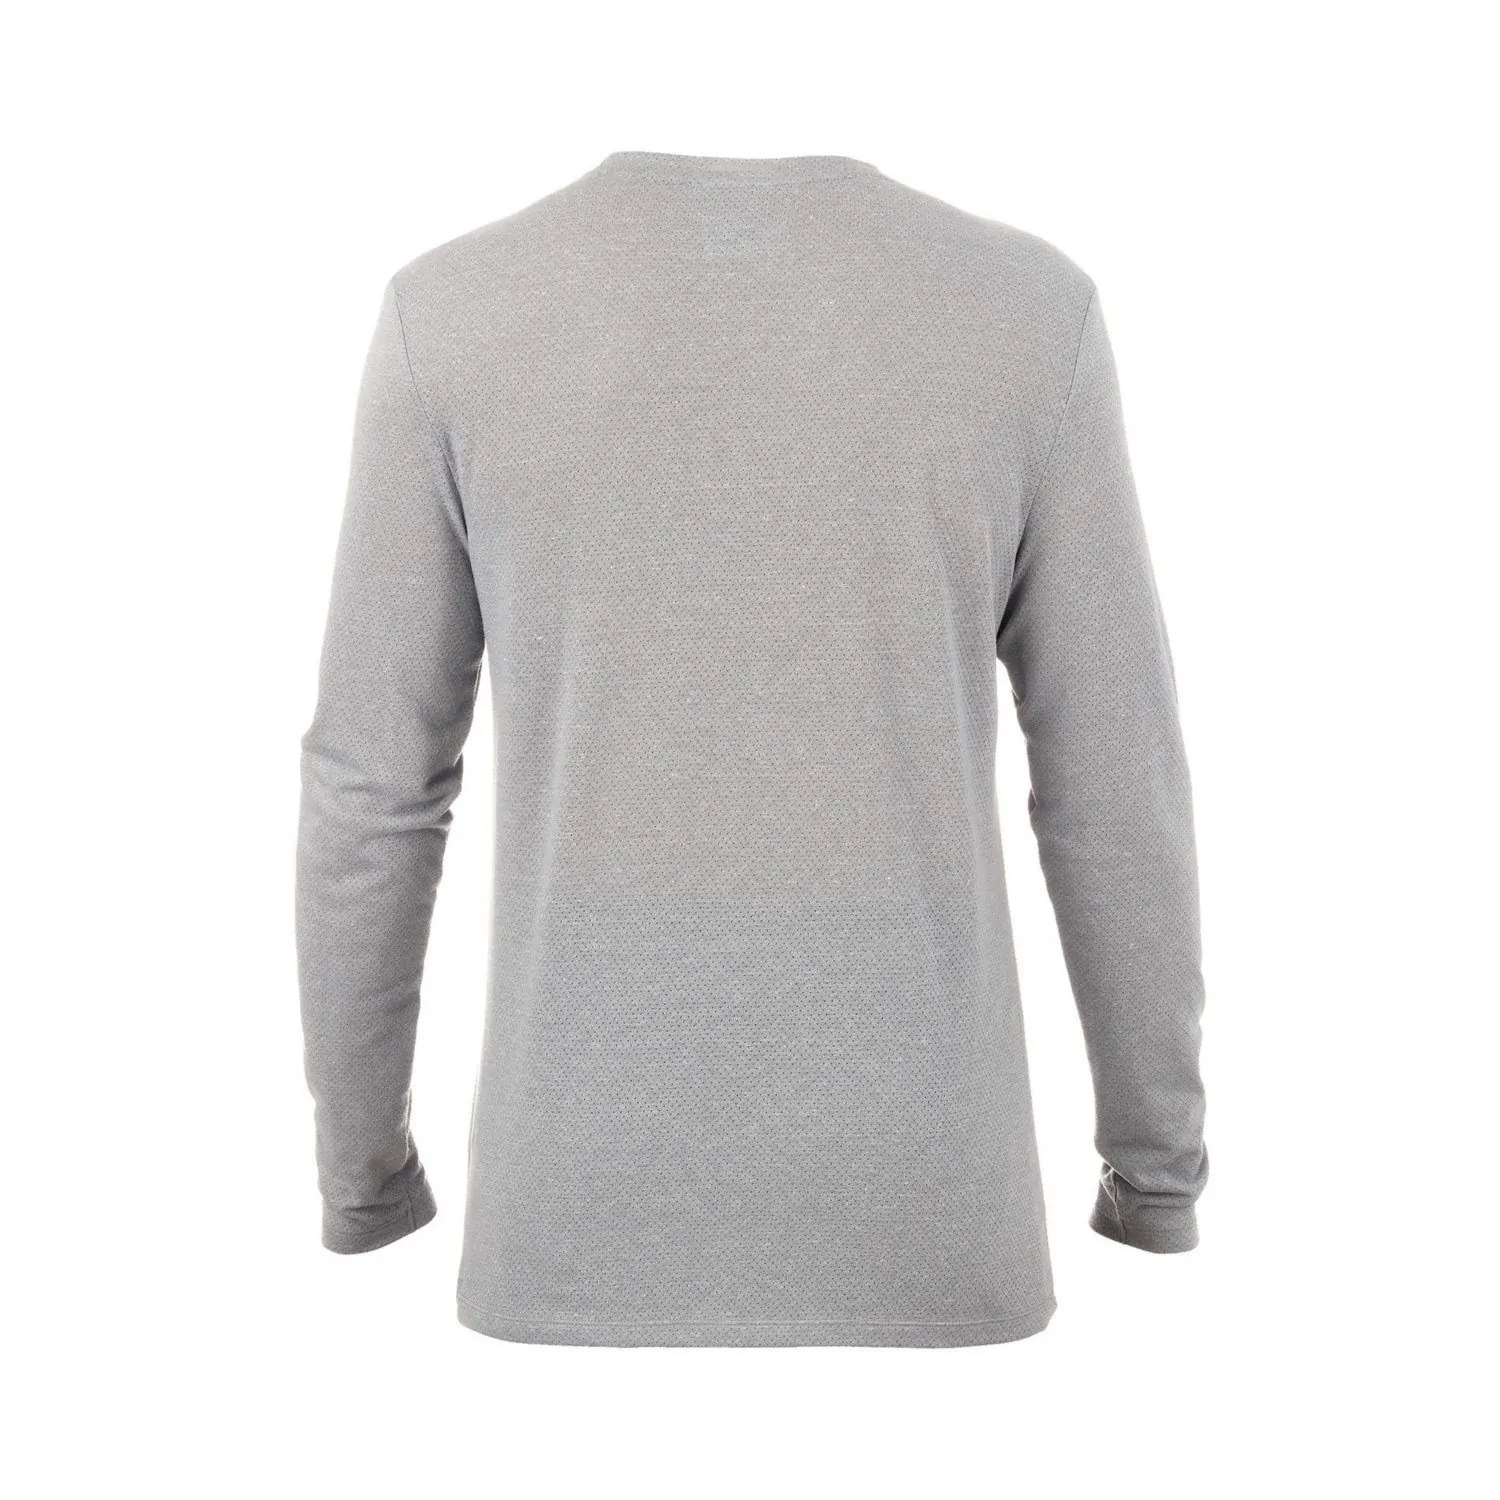 INFINITY Long Sleeve TOP - Gord's Running Store